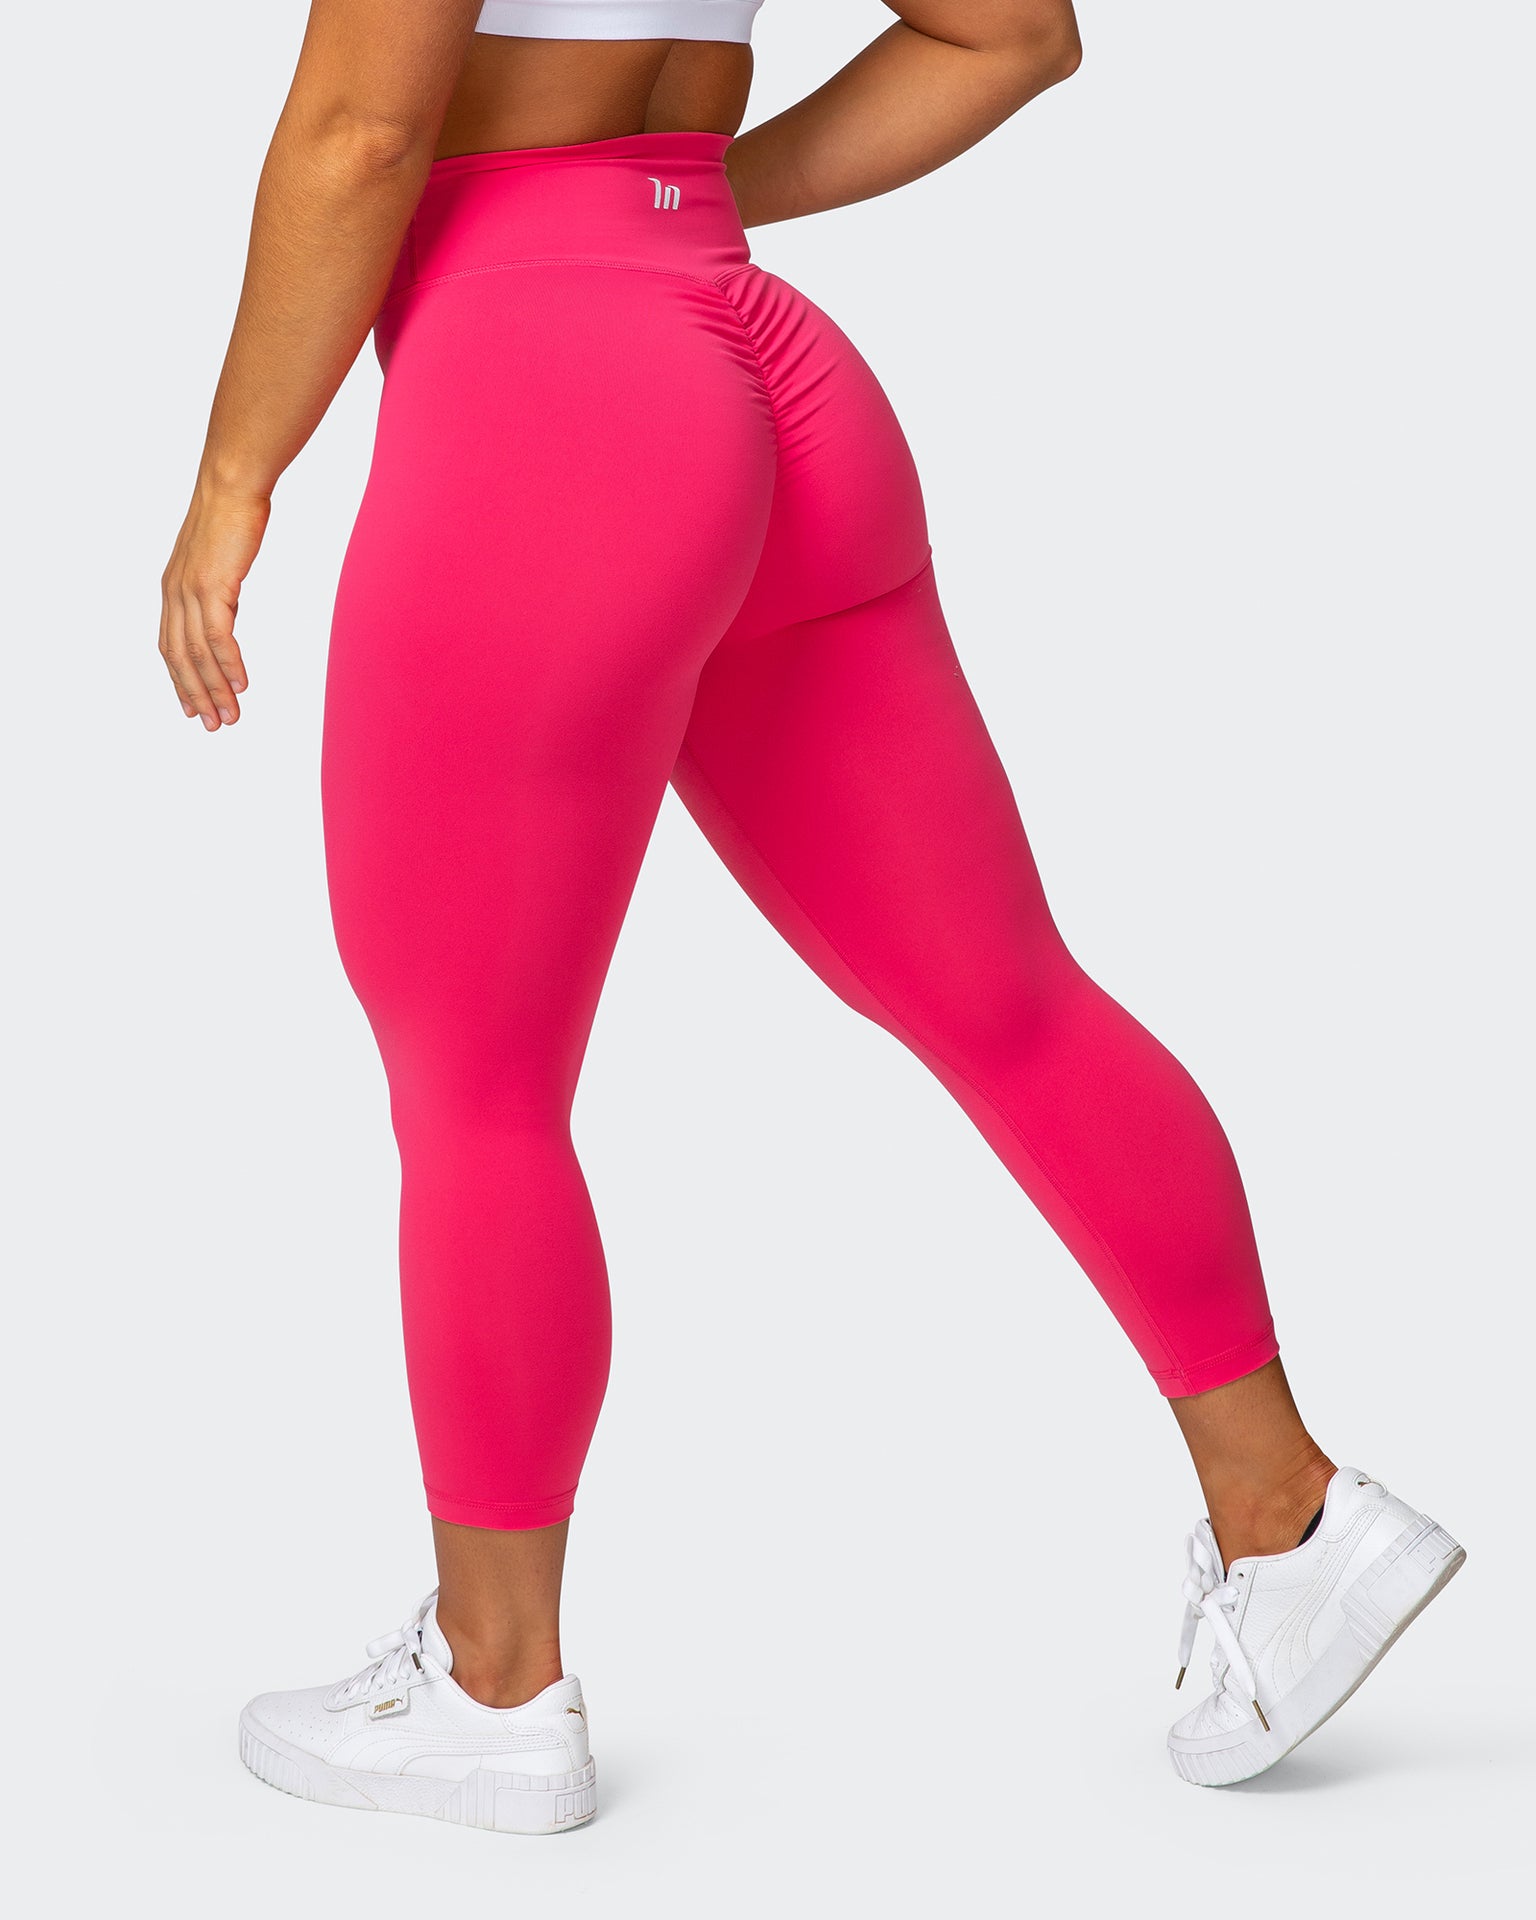 Signature Scrunch 7/8 Leggings - Paradise Pink - Muscle Nation